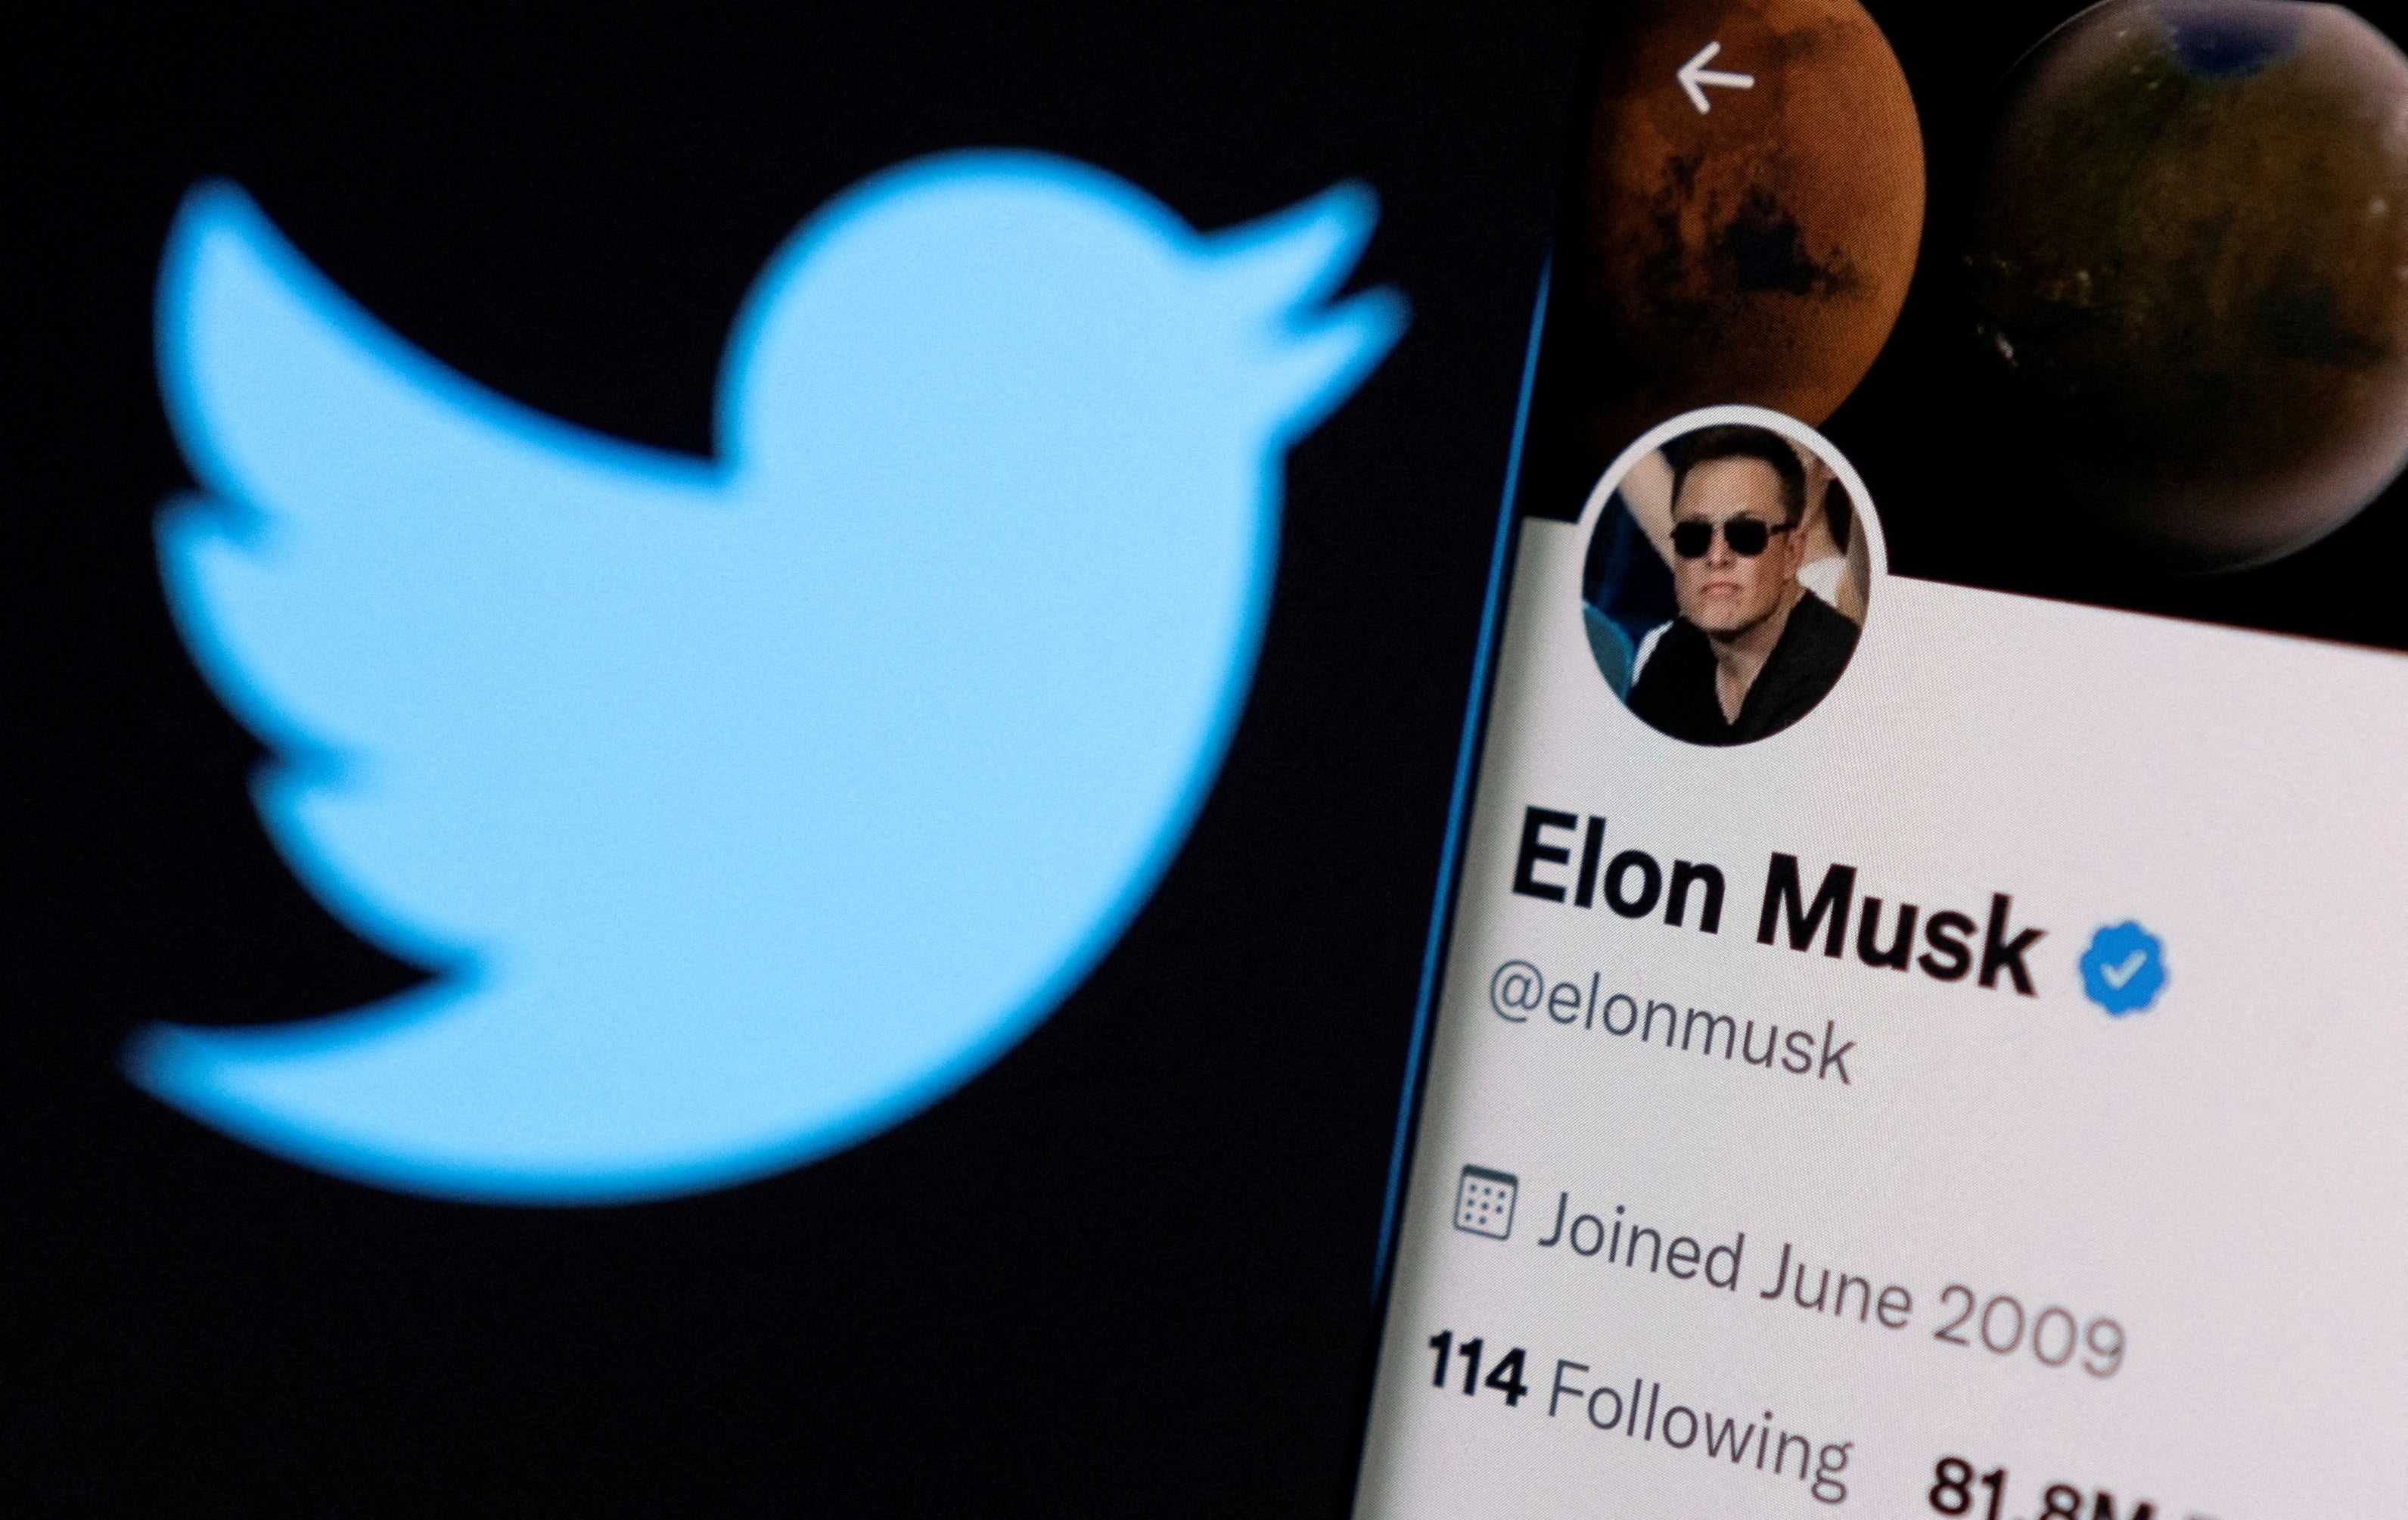 Will Musk also be tempted to curate his online persona and protect his business interests via Twitter?